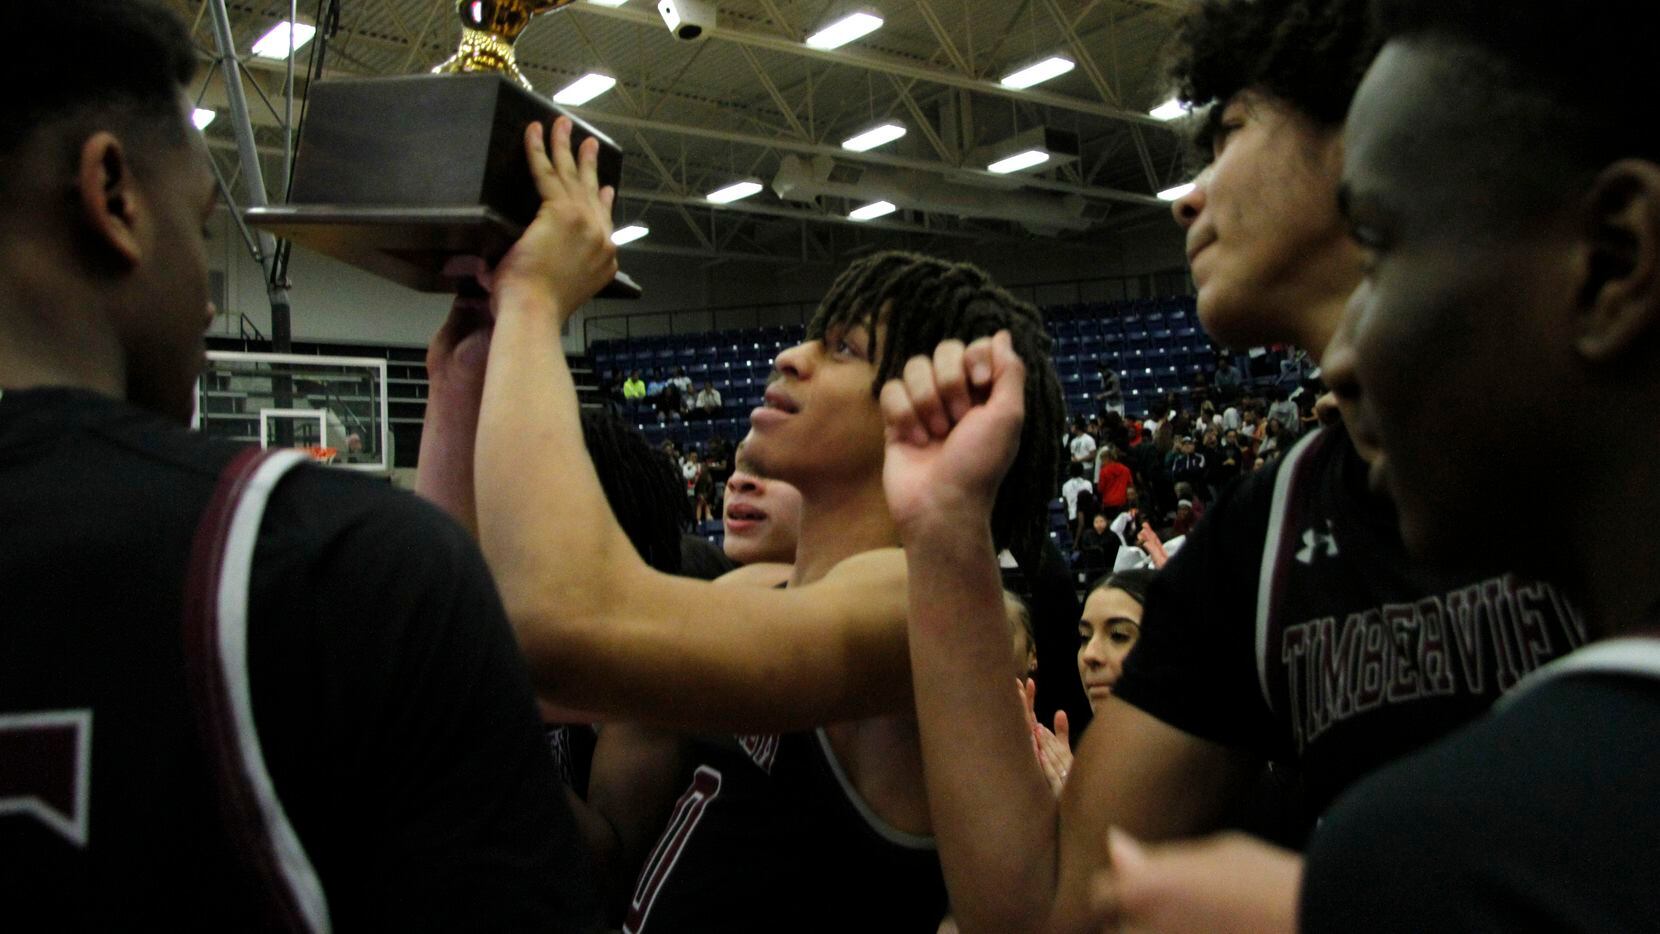 Mansfield Timberview players gather at mid-court as Joey Madimba raises the trophy after Timberview beat Mansfield Legacy 41-40 in overtime in Tuesday's Class 5A Region I quarterfinal.